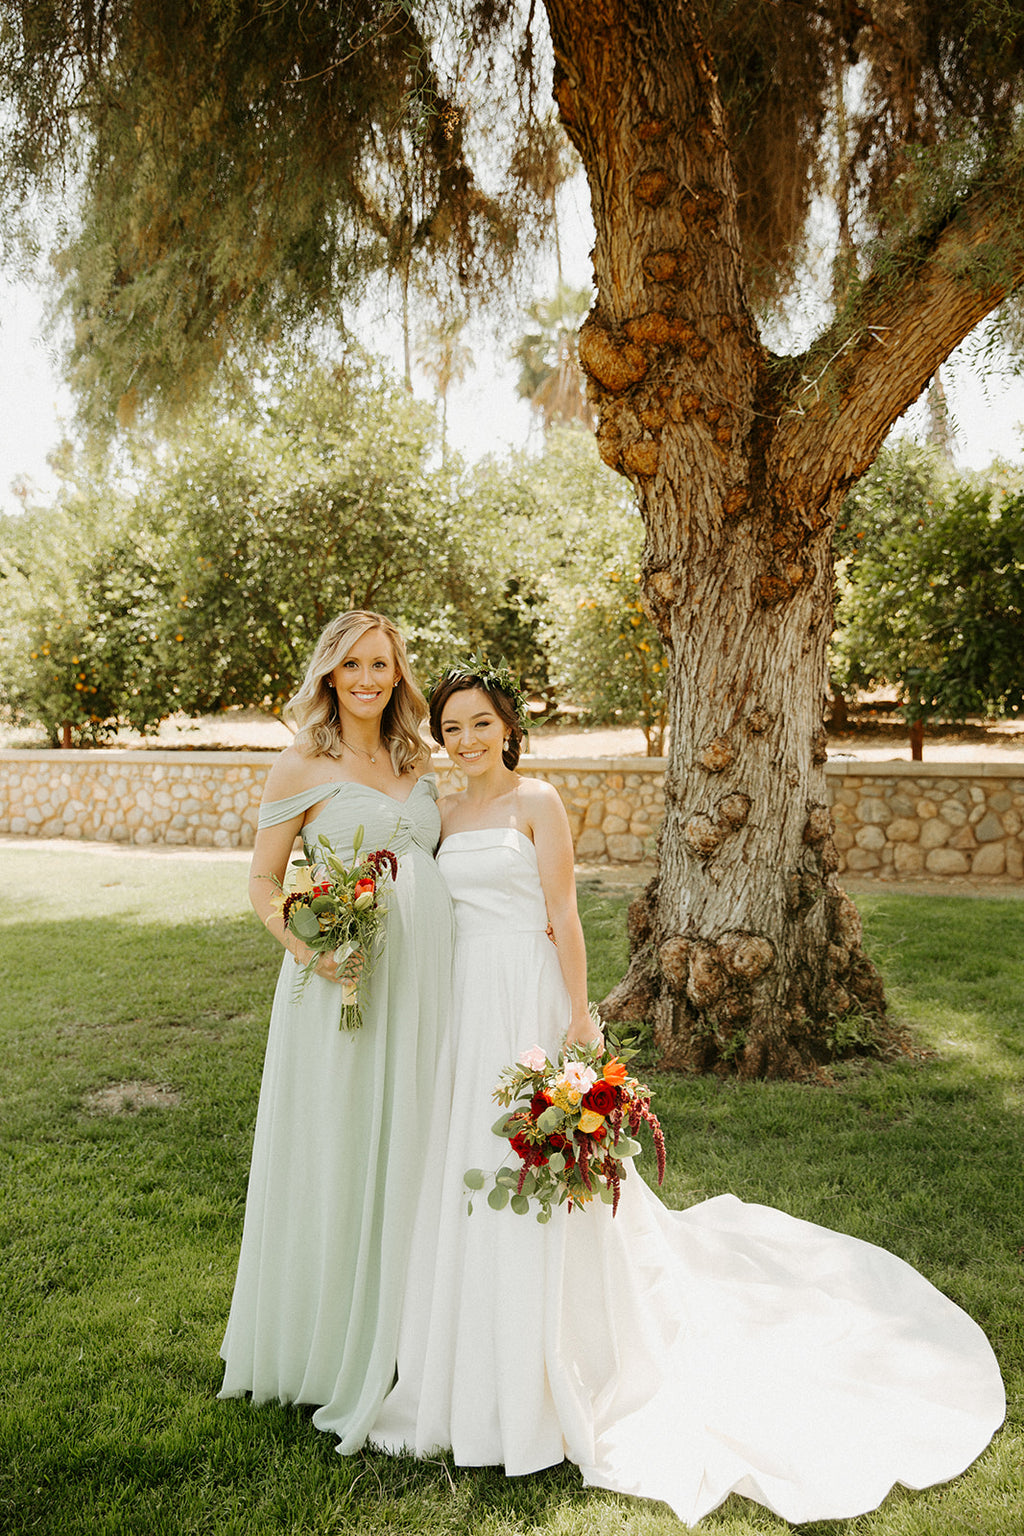 Green bridesmaid dresses are popular for weddings in 2023